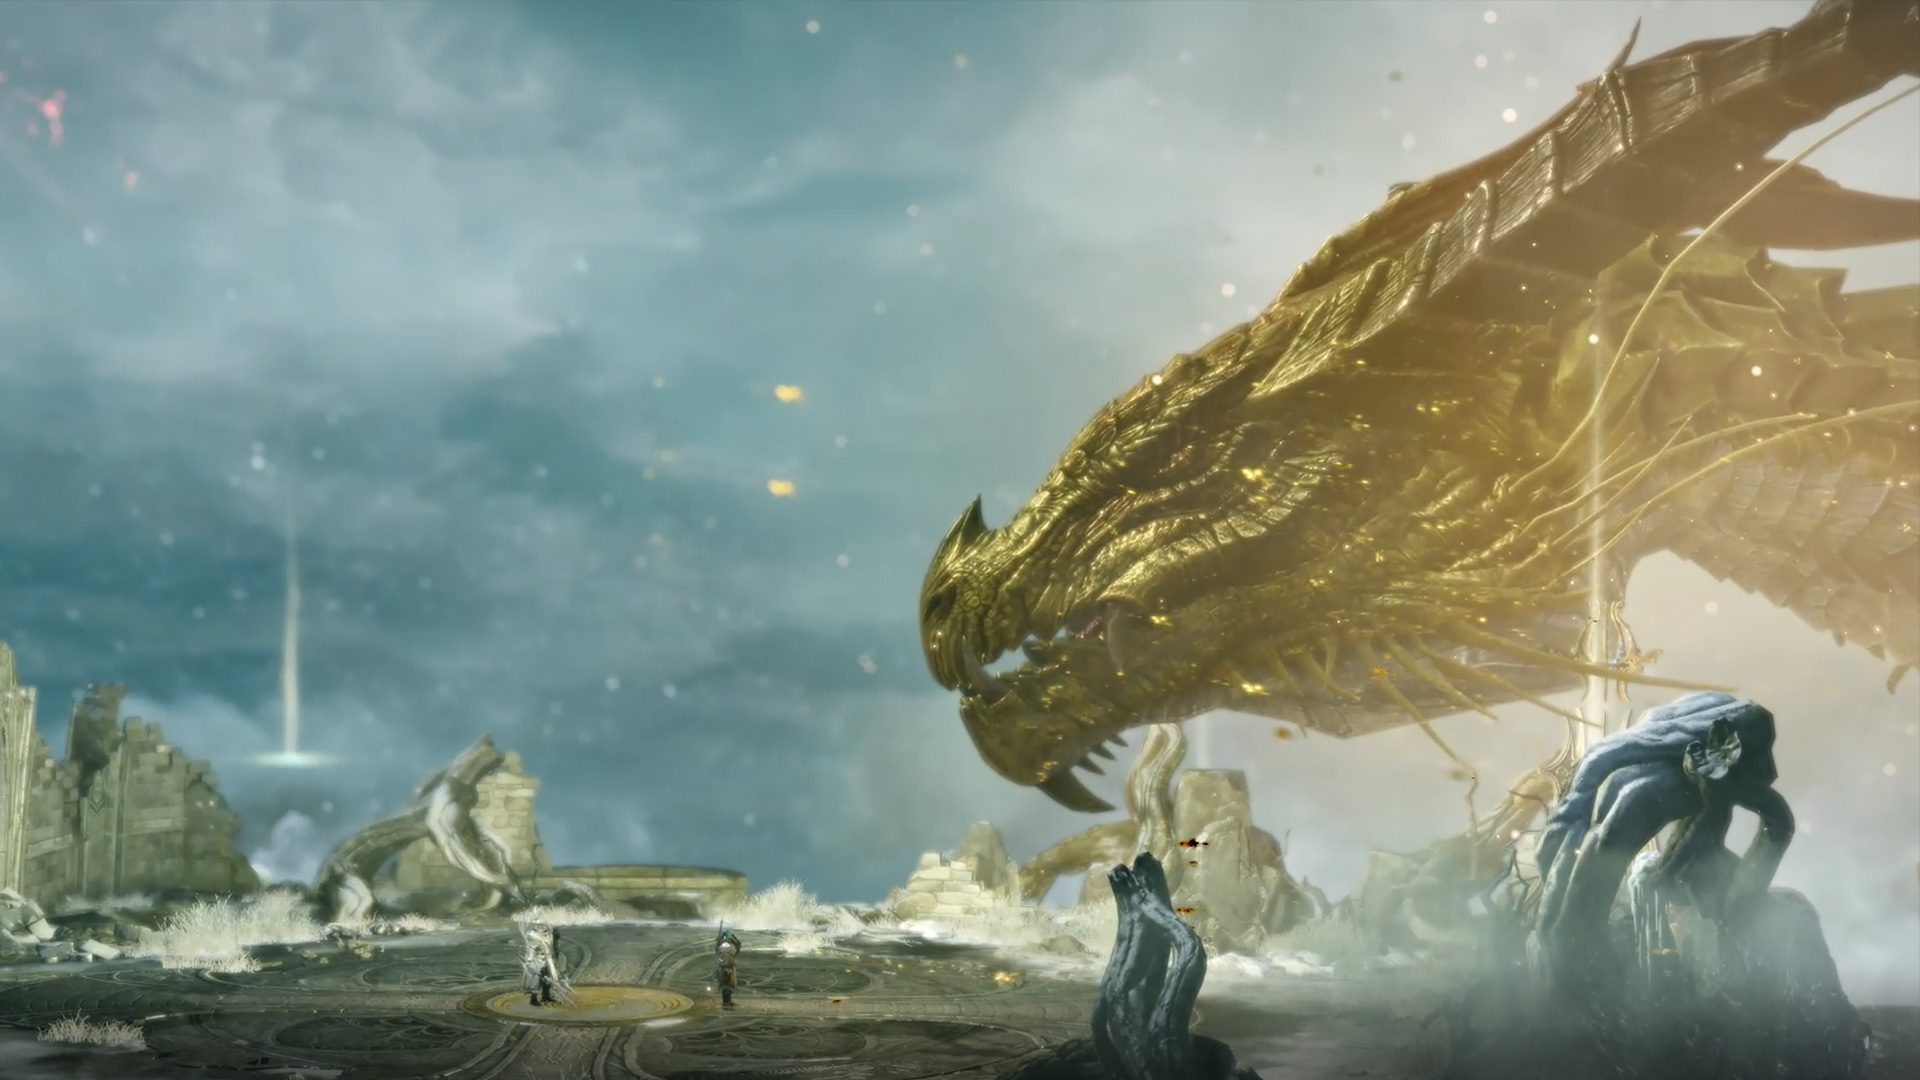 Learn More About Alpha - News  Lost Ark - Free to Play MMO Action RPG